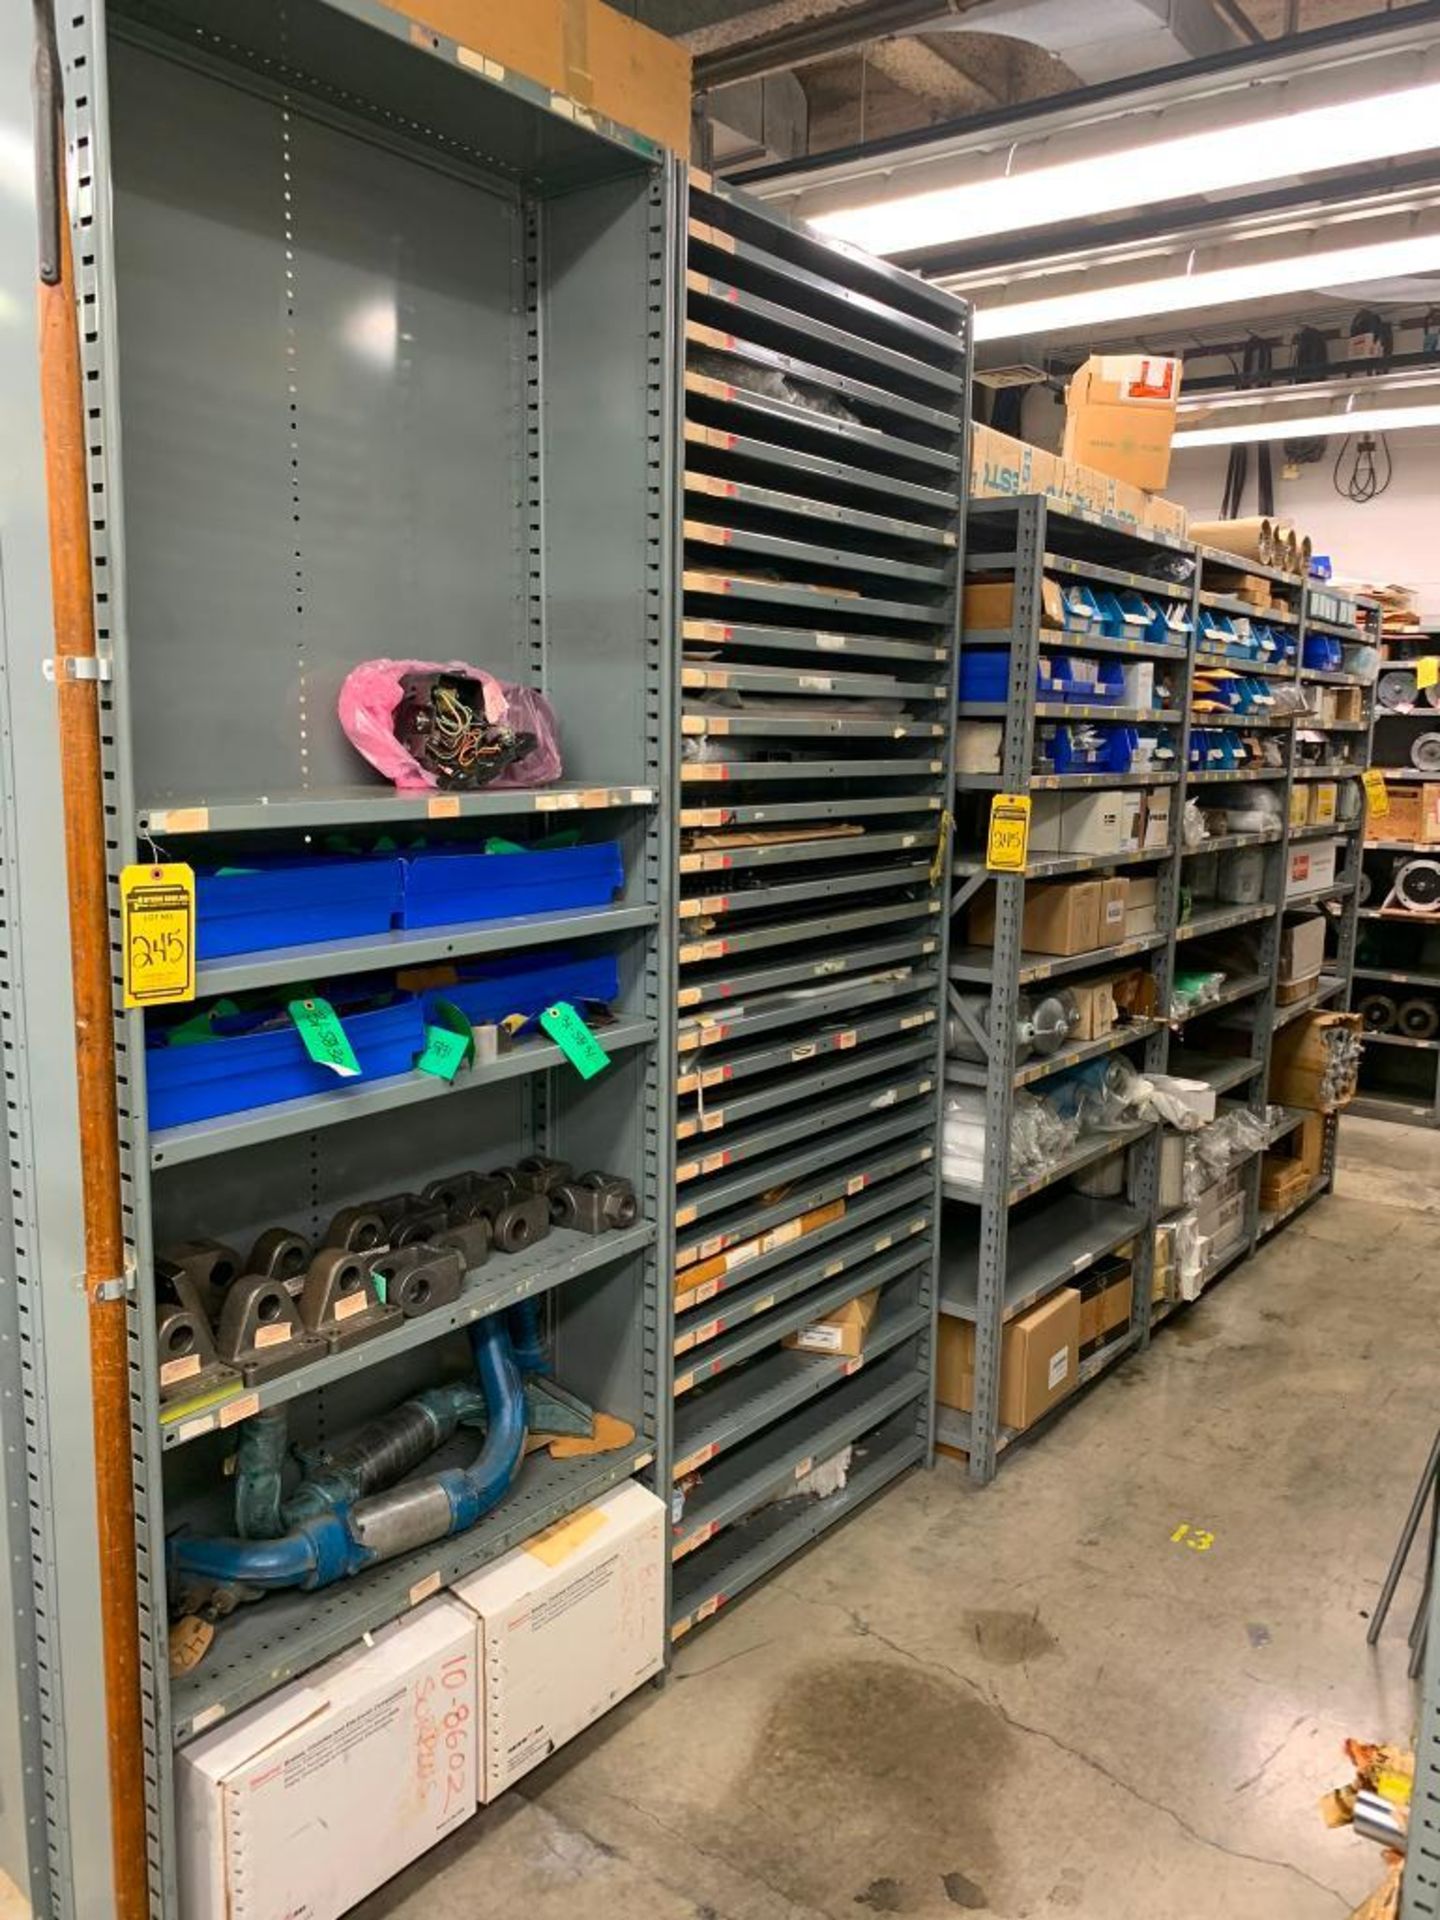 (10x) Bays of Clip Style Shelving w/ Content of Rollers, Roller Chain, Pulleys, Sprockets, Gears, Pa